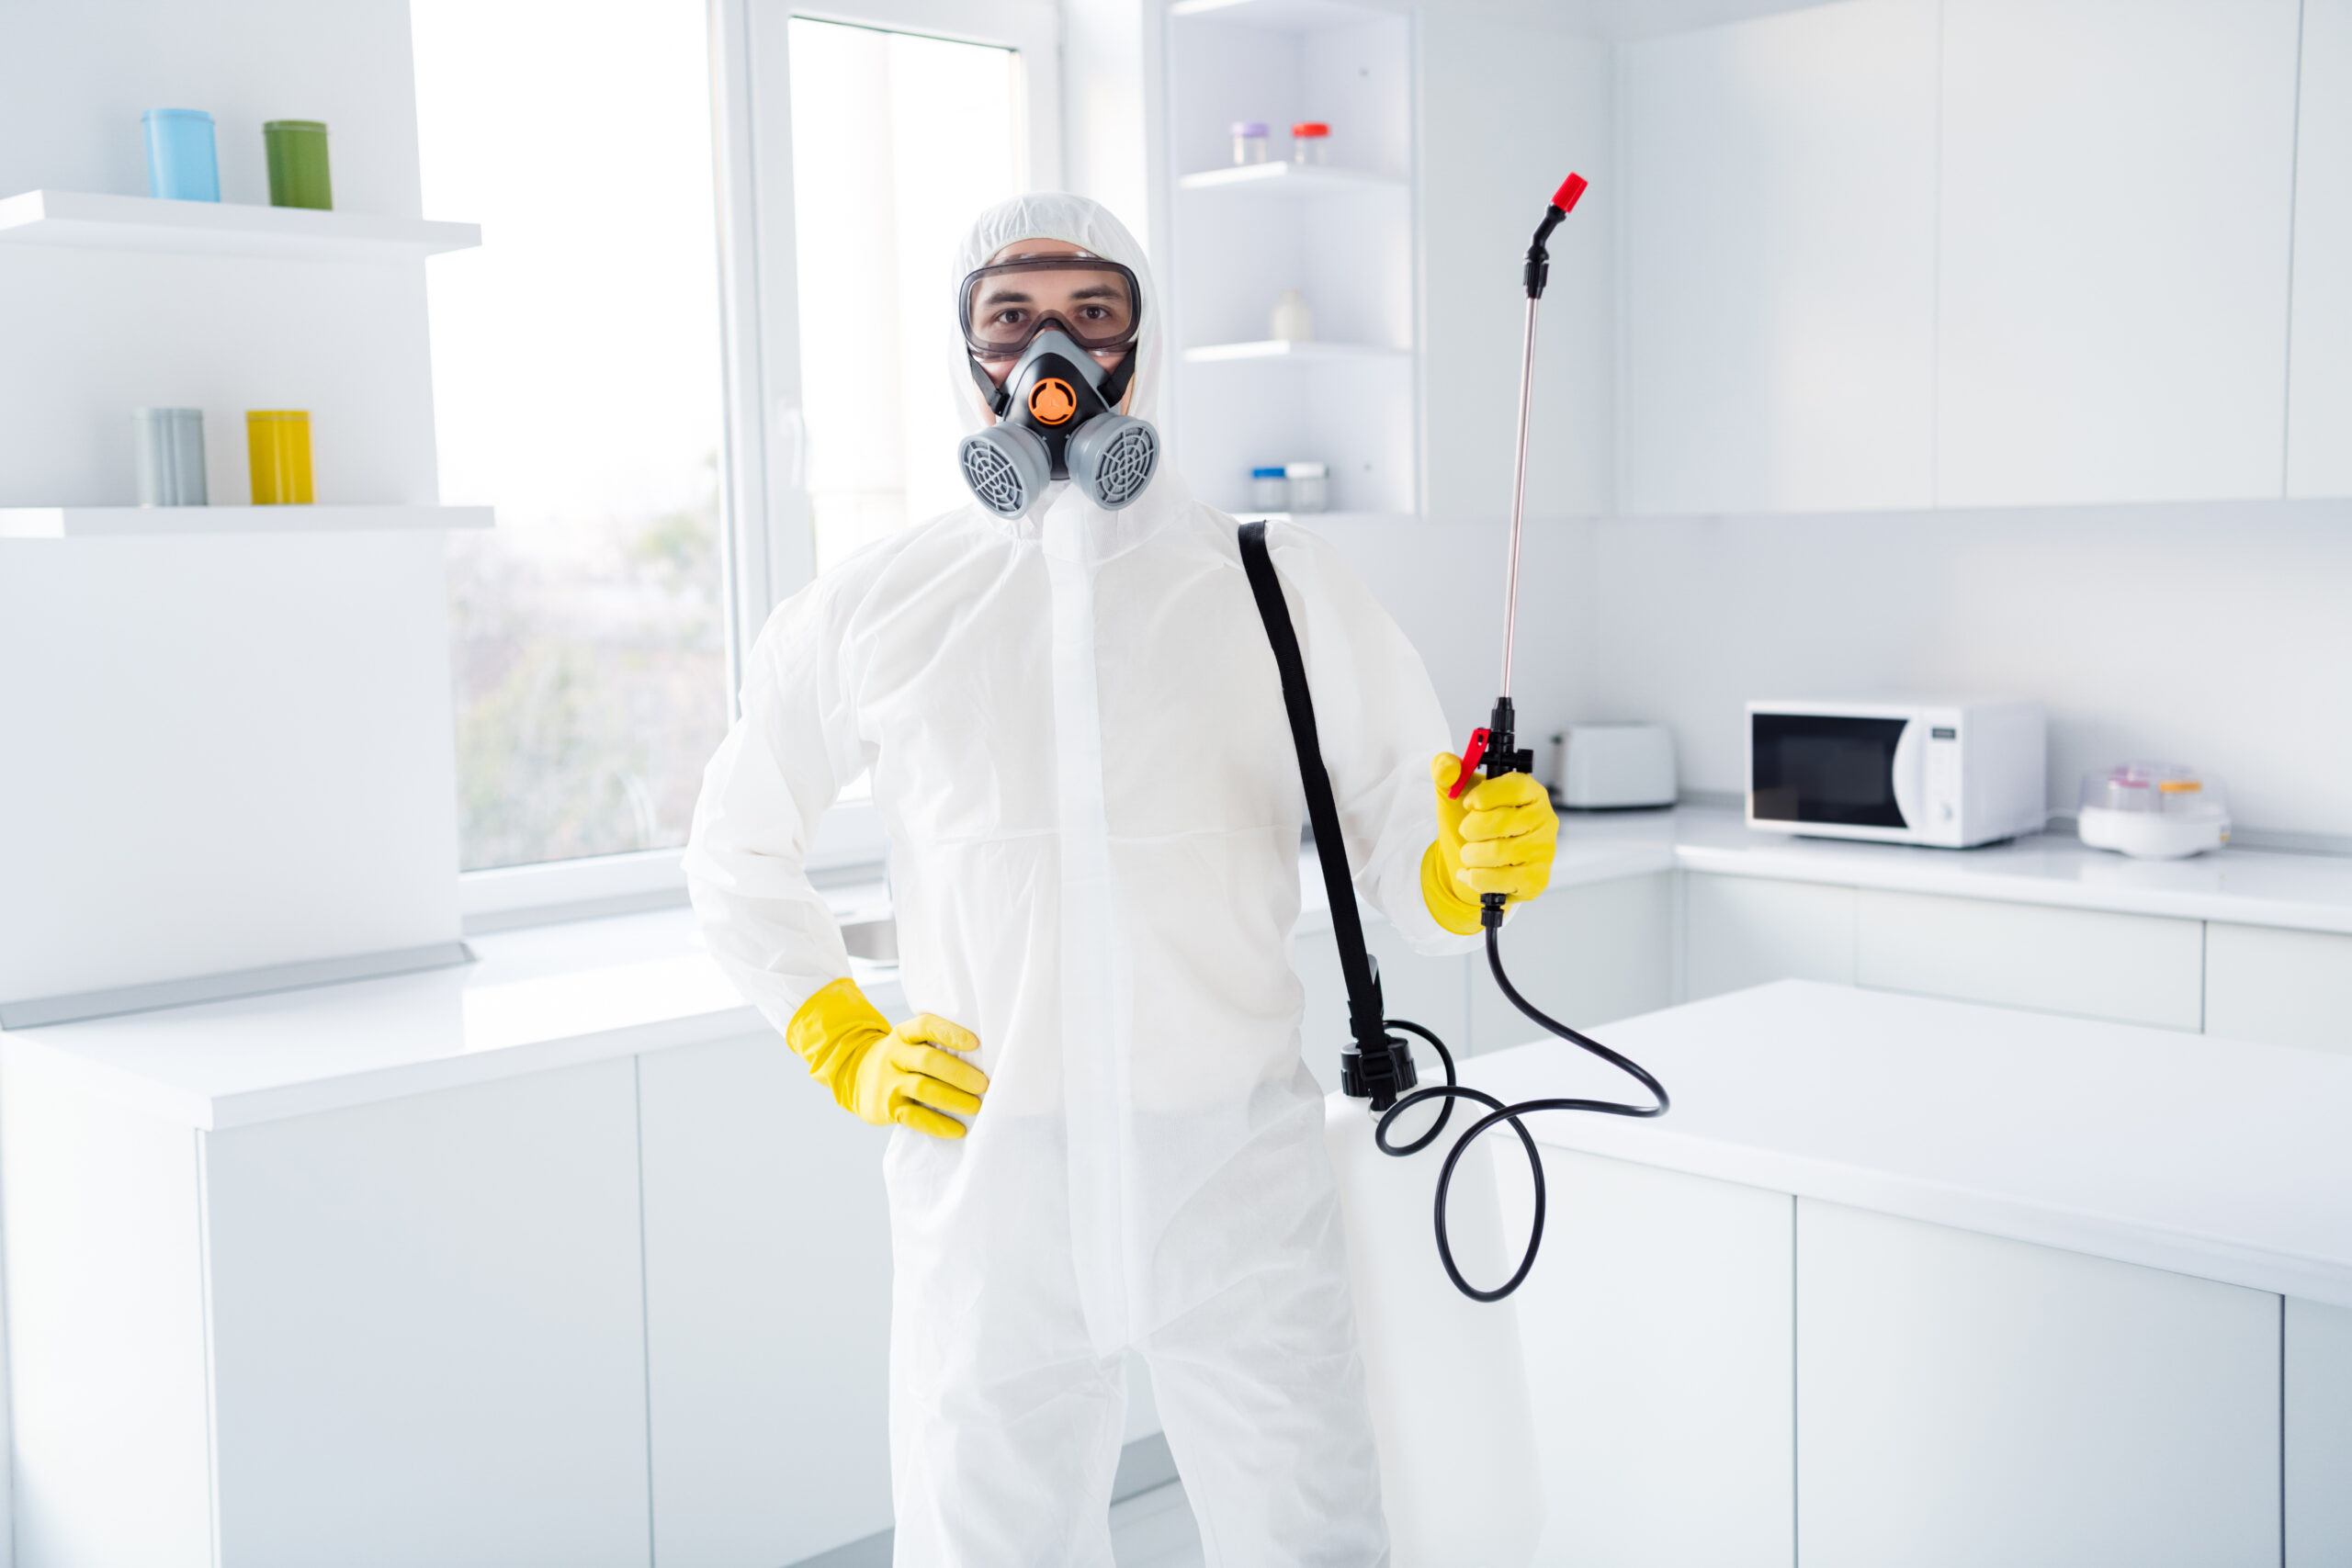 Man in full hazmat suit with sprayer wand ready to apply pesticide to his house